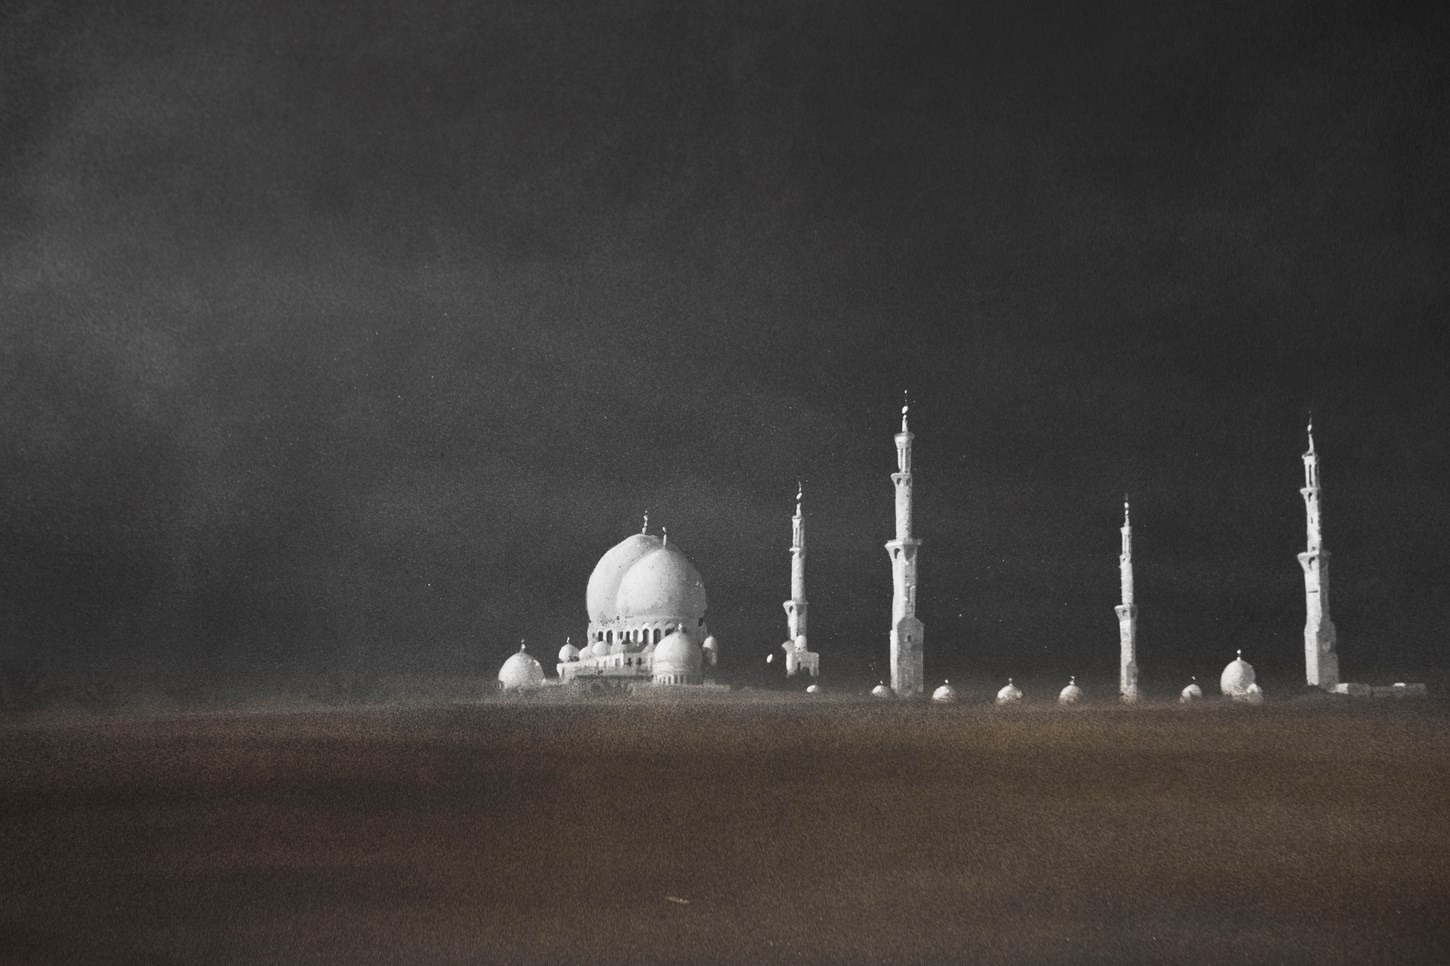 Al Khulud - The sands of time bury all but what we hold most dear. Abu Dhabi Mosque